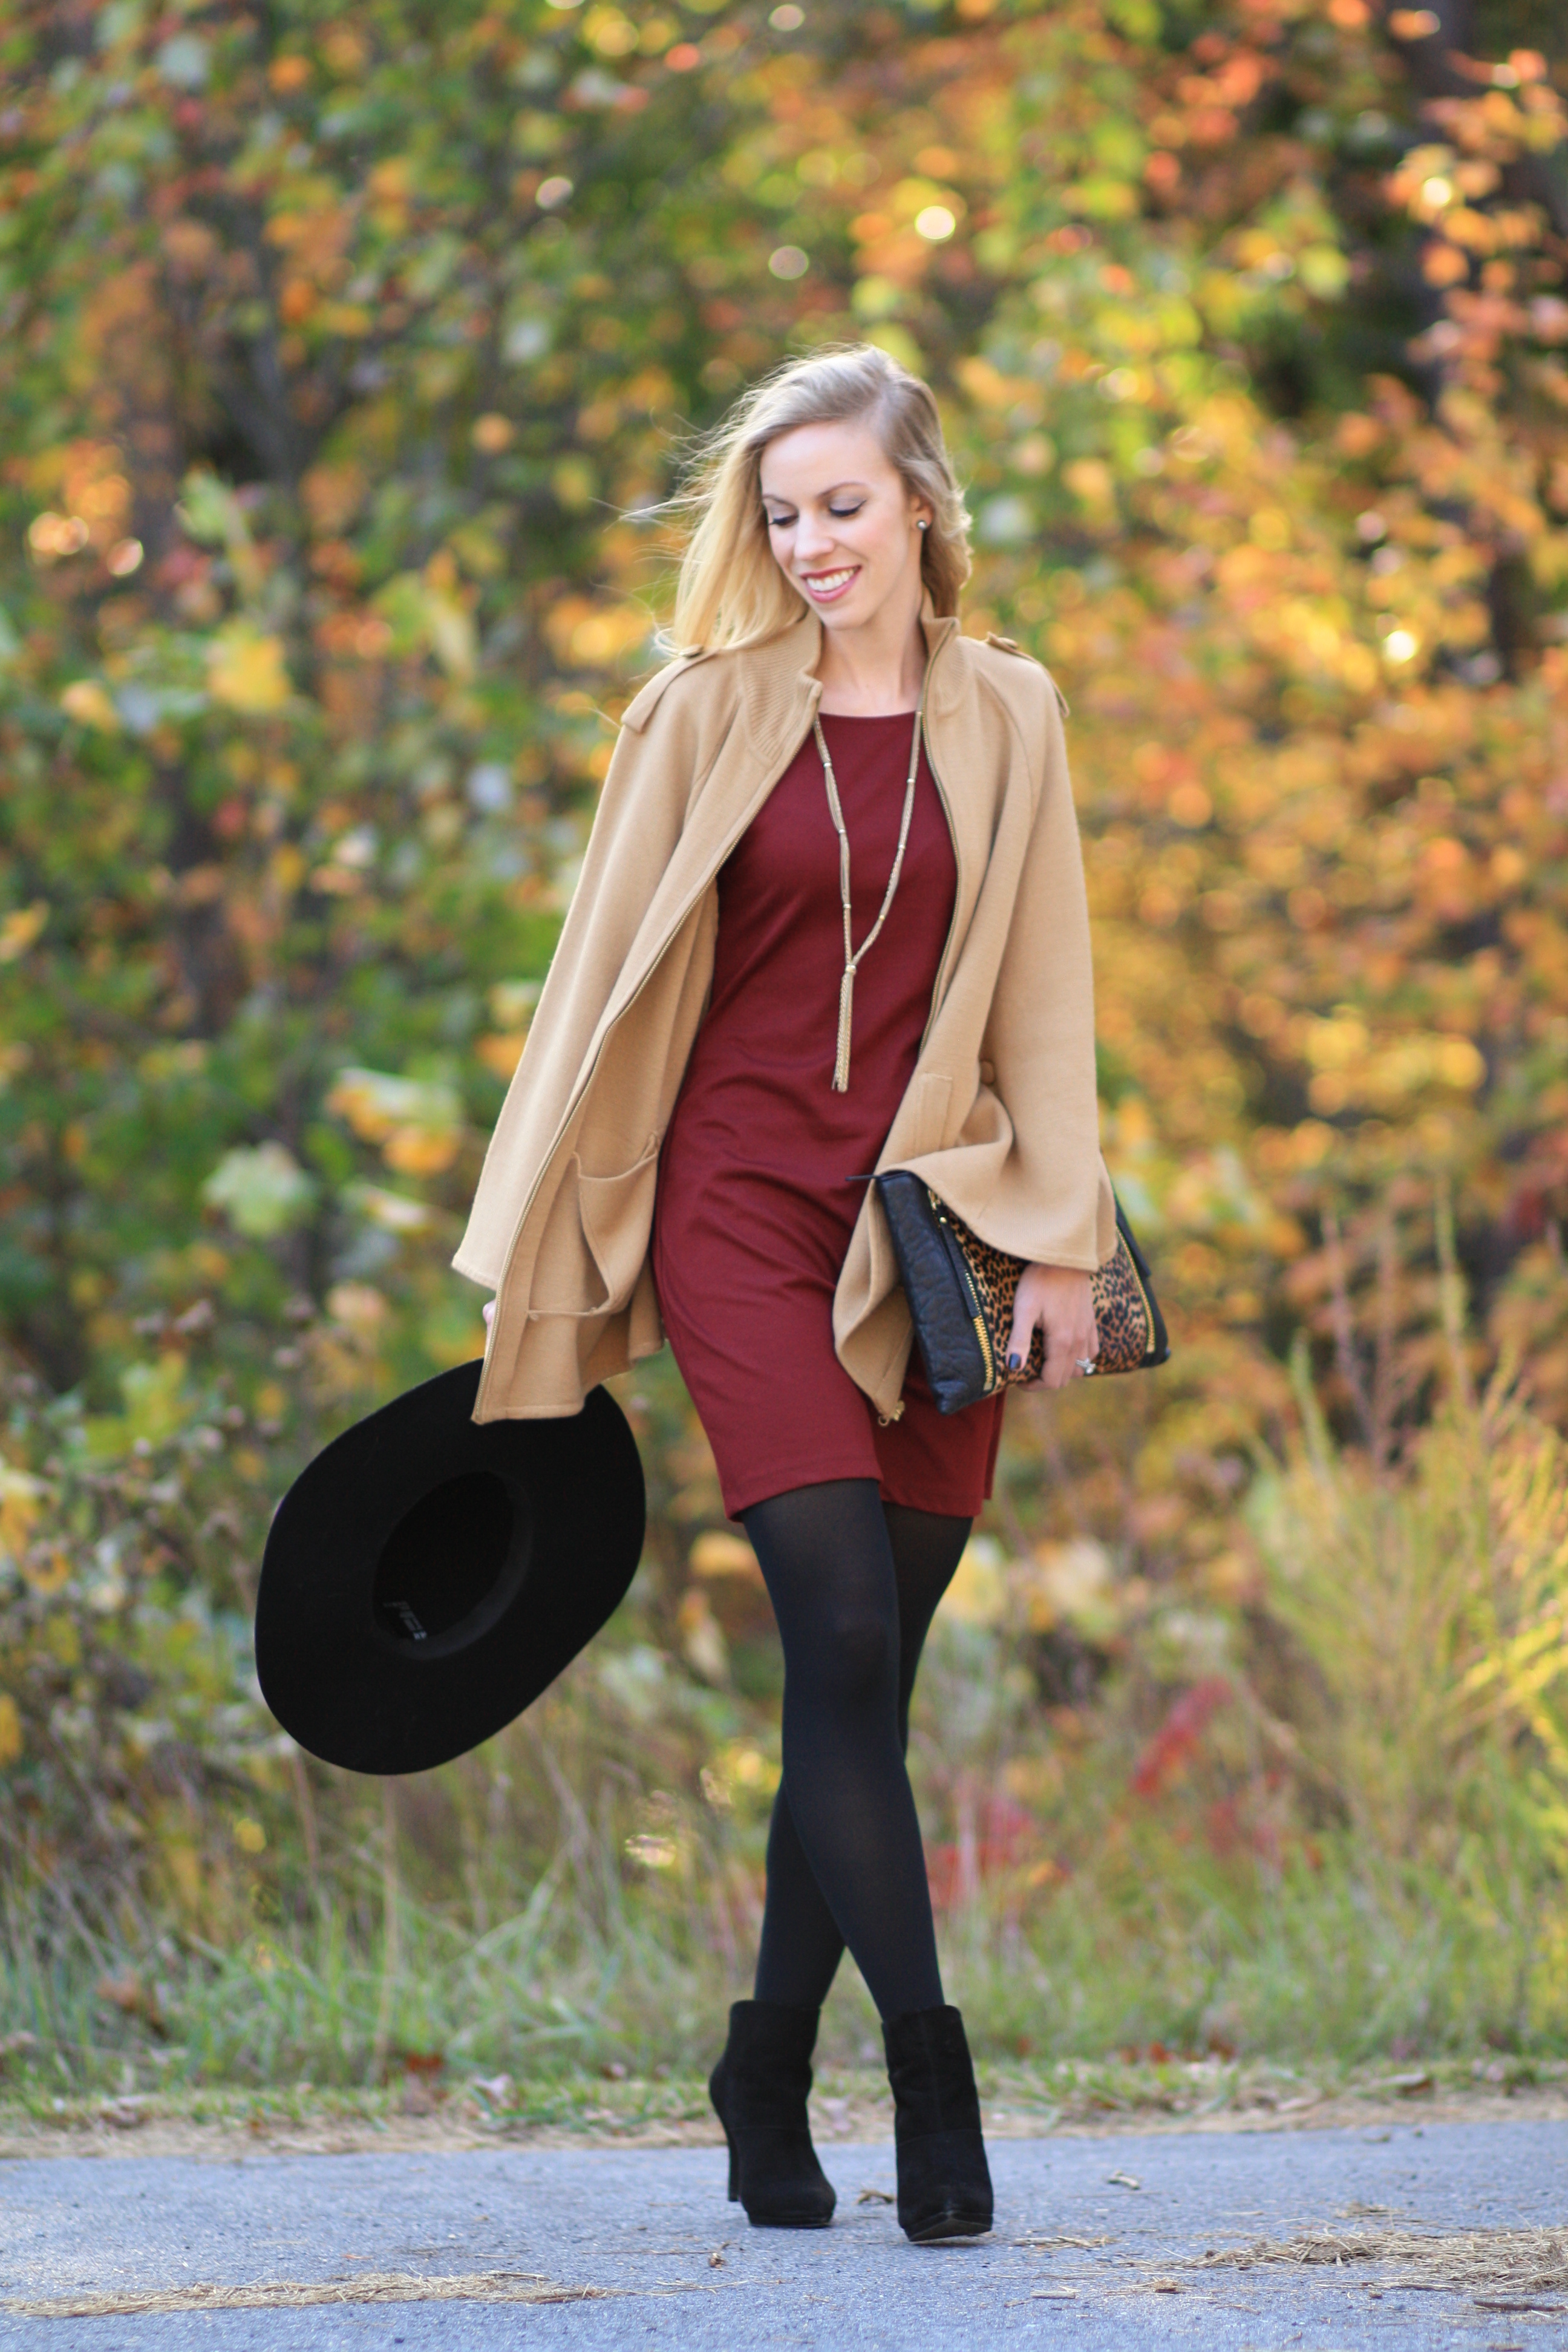 camel cape, burgundy shift dress, black tights, black suede ankle boots,  black wool floppy hat, gold tassel necklace, fall outfit with came cape -  Meagan's Moda